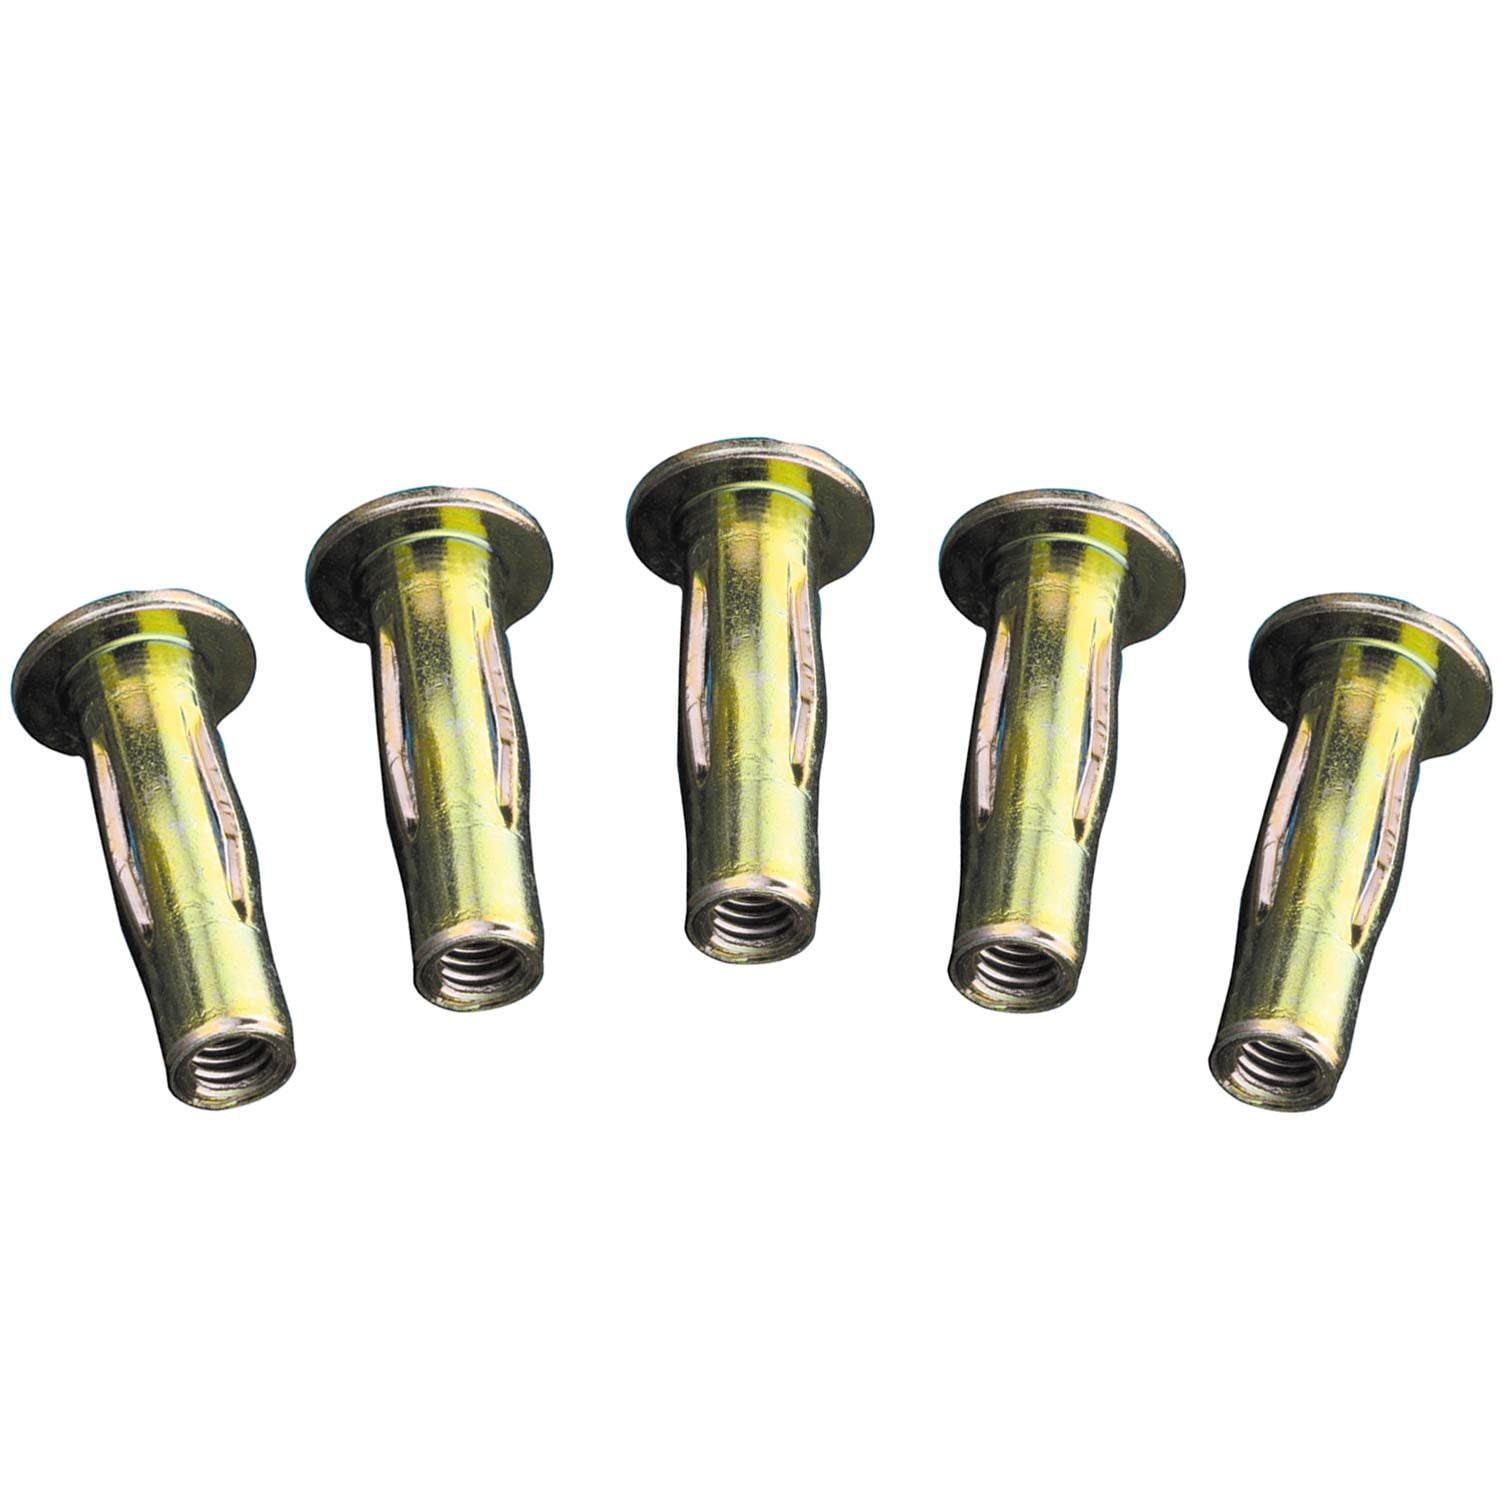 W/ Mounting Rivets Fixed Rivet Nut Anchor Nut 2-Pack 1/4-20 T Nut 